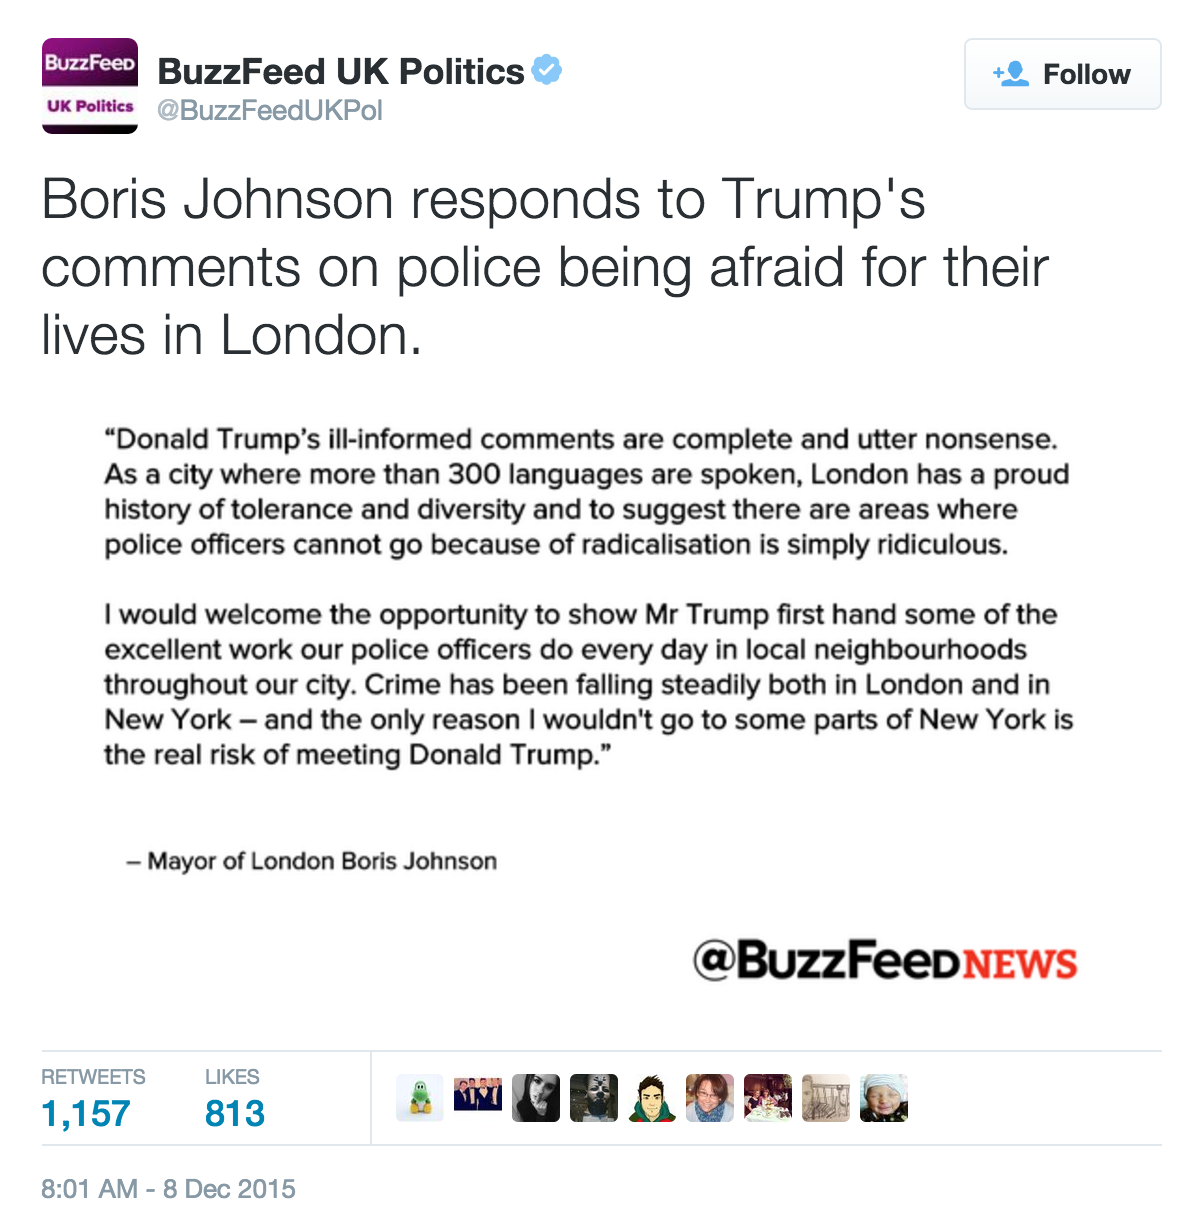 feathers:
“ buzzfeed:
“ That’s quite a quote.
”
In case you don’t follow UK politics: Boris Johnson is a Conservative politician. That’s the Party of the Prime Minister who’s pushed for bombing Syria. PM who’s incidentally a former schoolmate of...